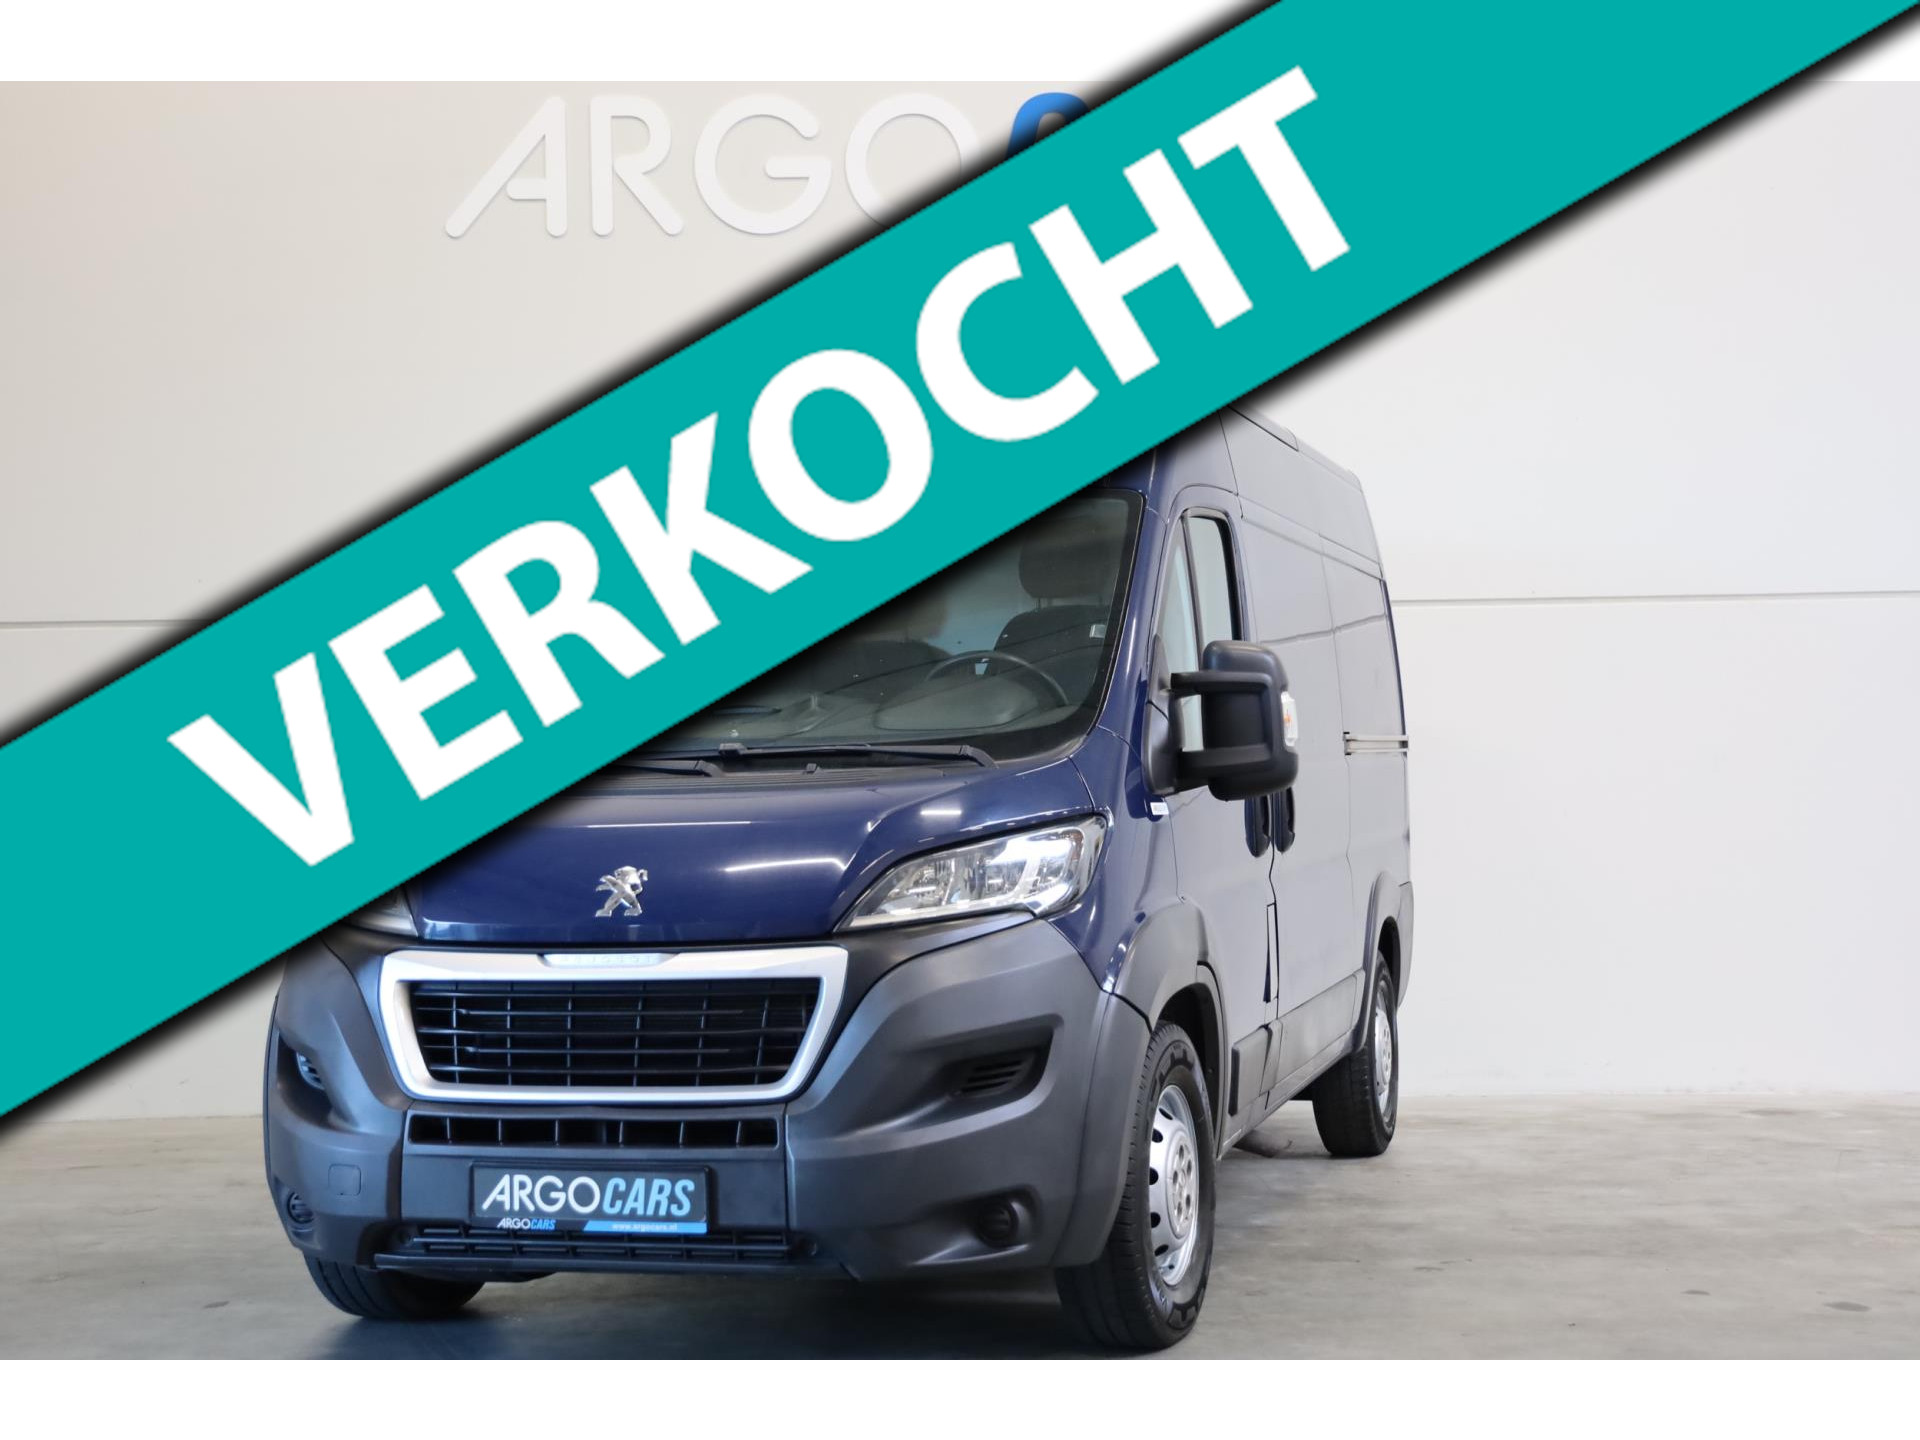 Peugeot Boxer 2.2 HDI L2/H2 XR NAP AIRCO CAMERA TREKHAAK CRUISE CONTROL TOPSTAAT LEASE V/A € 99,- P.M. Bestelauto